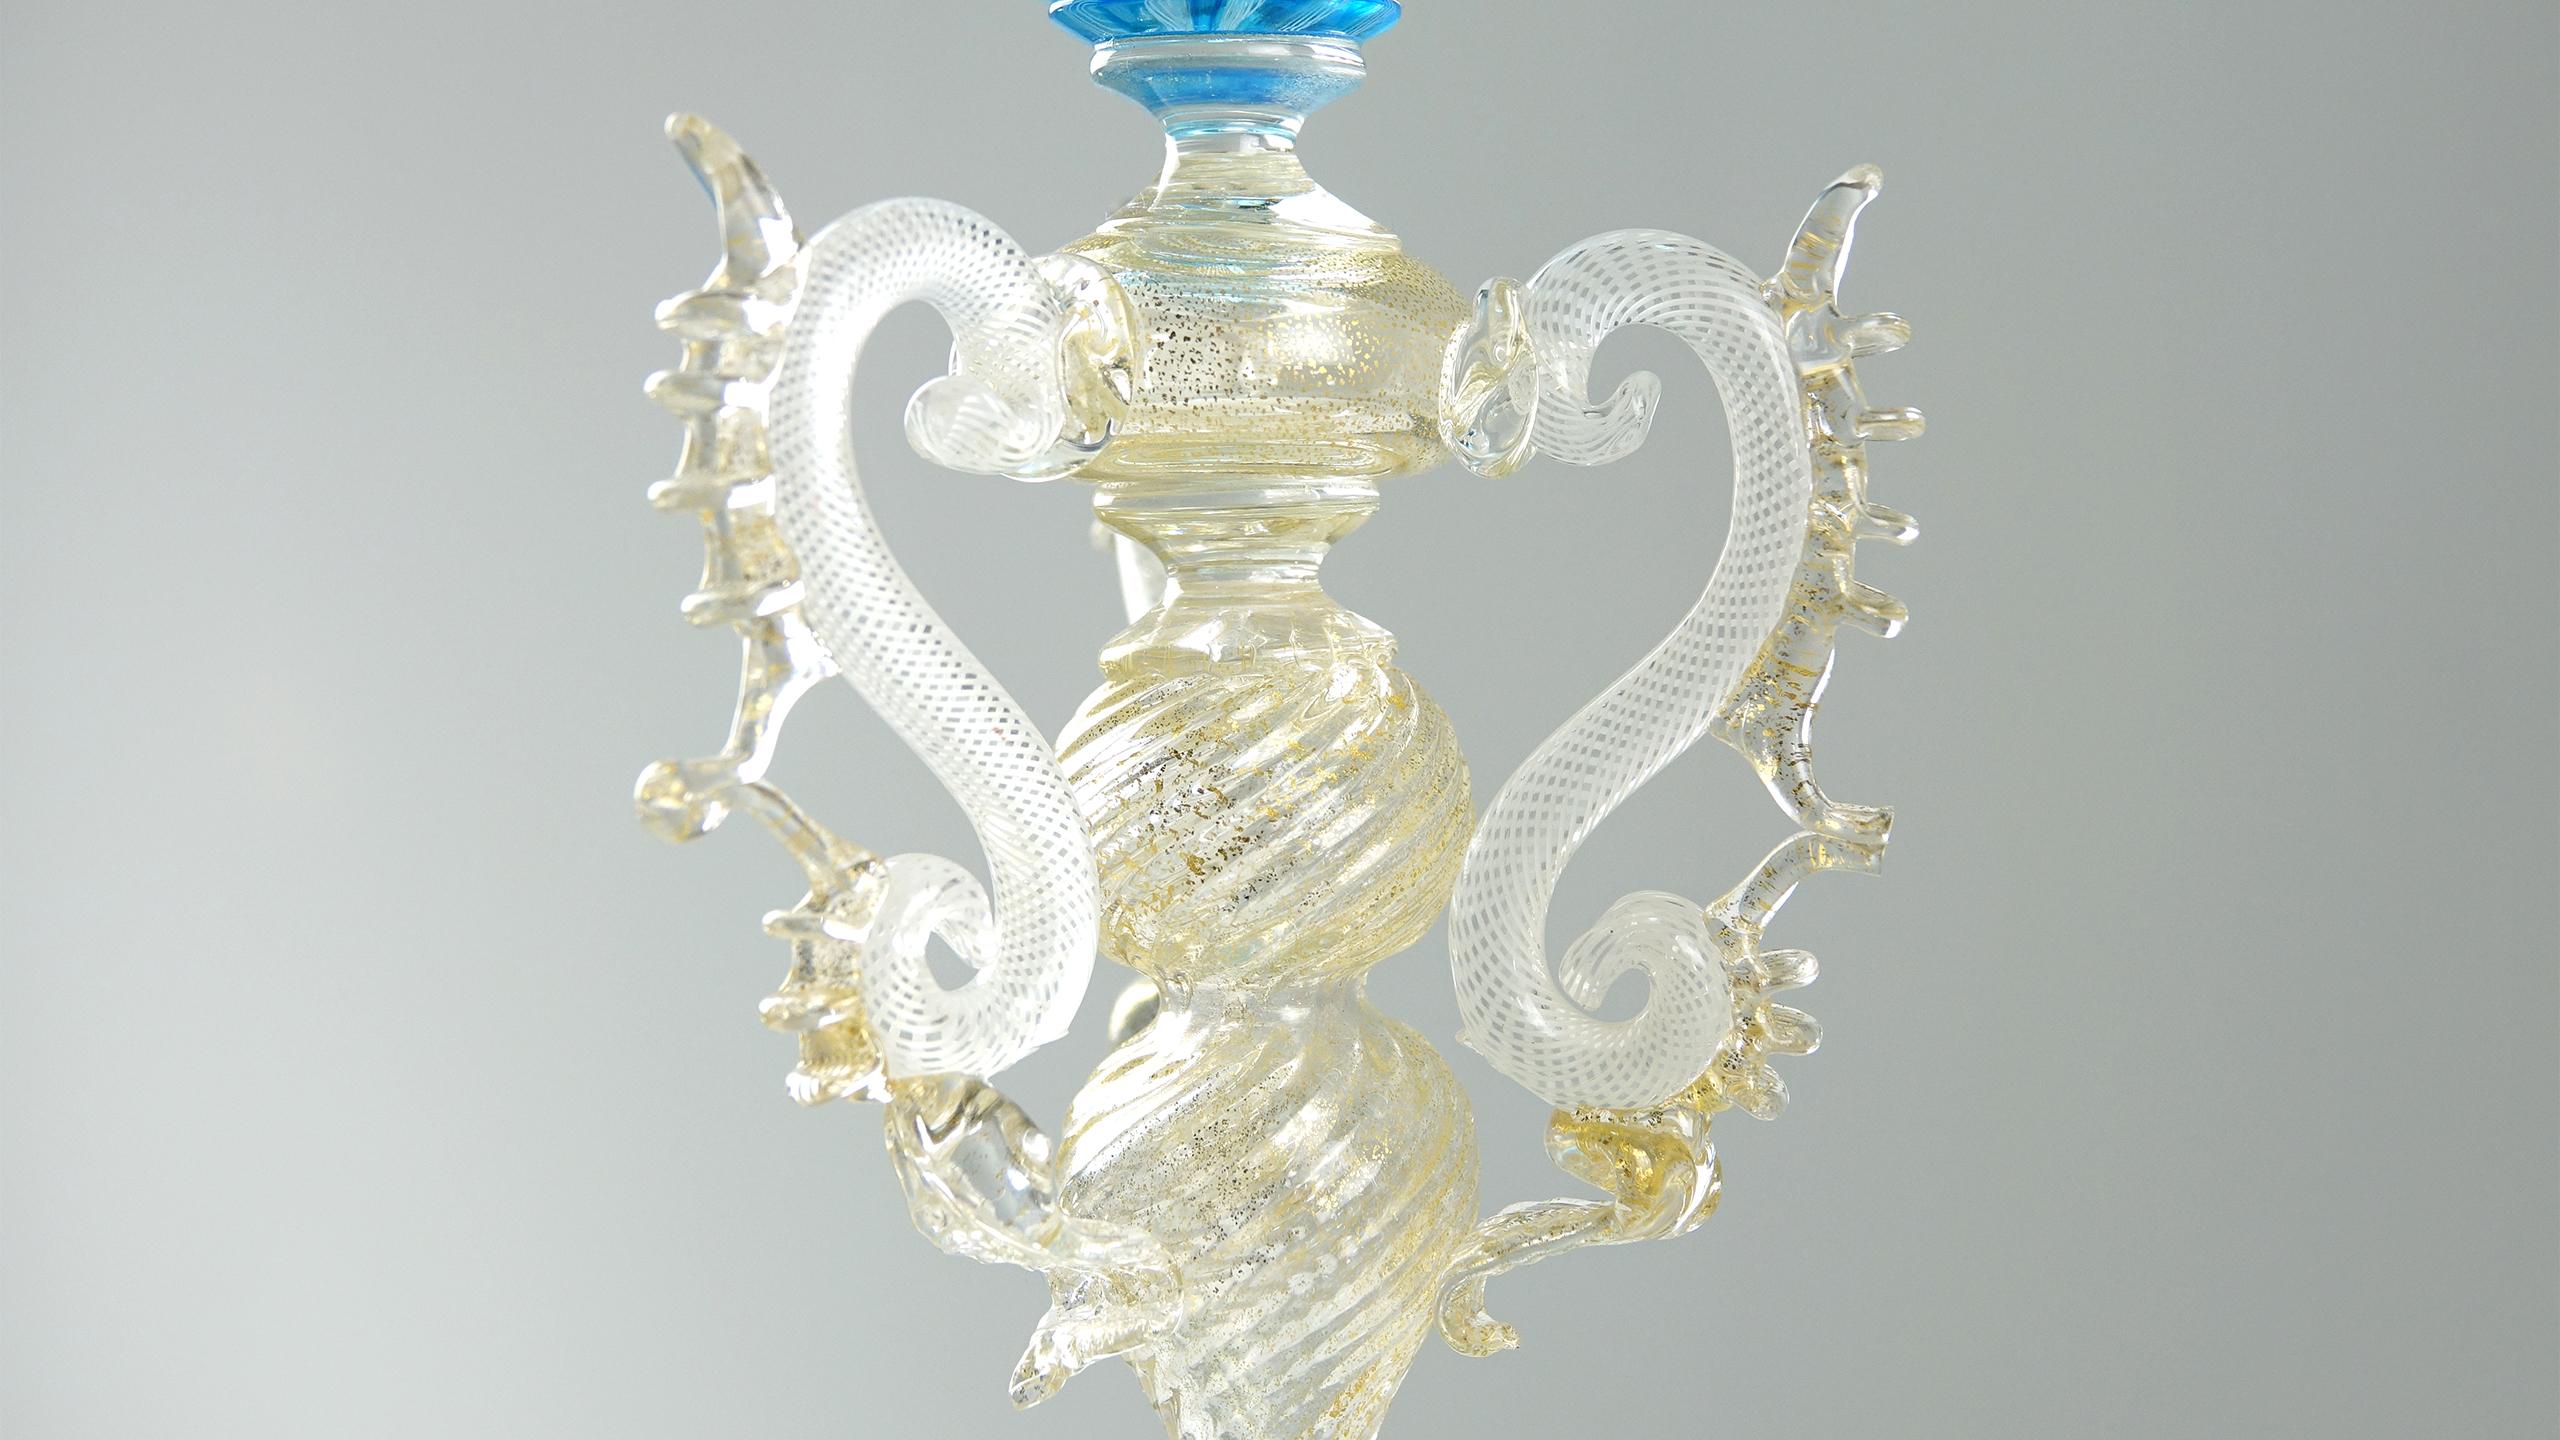 Extraordinary wonderful giant Venetian collector's glass of Barovier e Toso.

The measures are: Diameter 12 cm and height 28.2 cm.